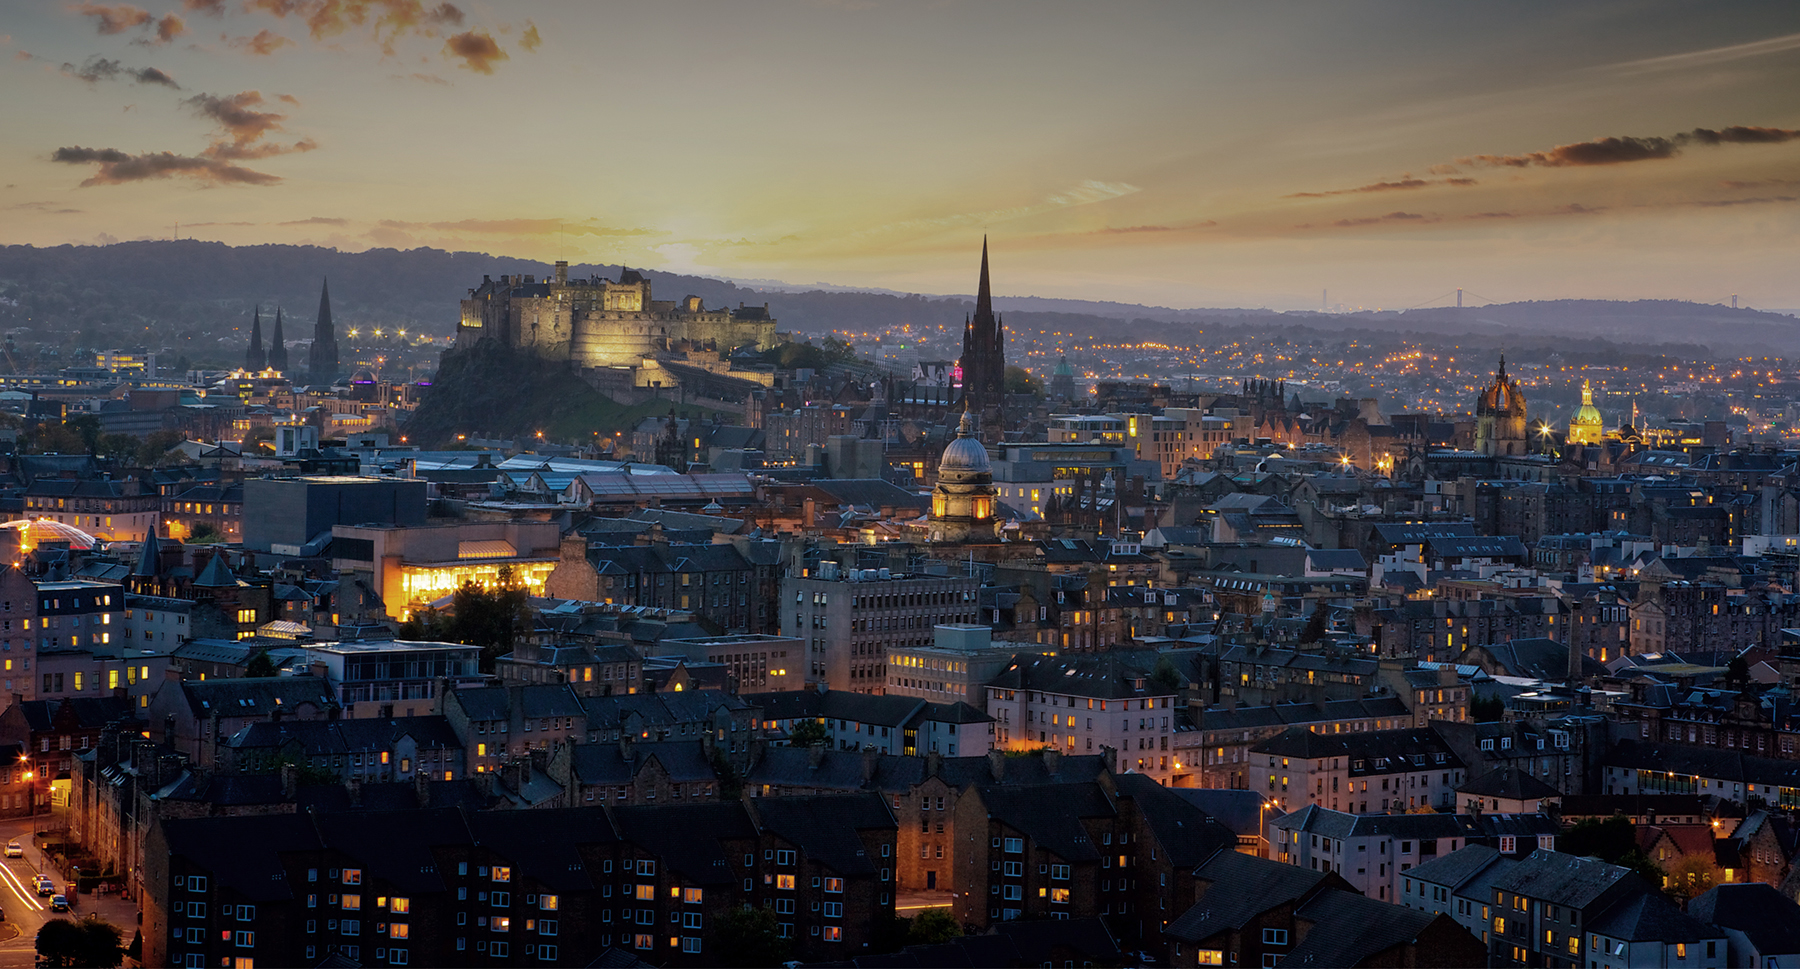 Award Winning Self Catering Apartments <br />
in Central Edinburgh